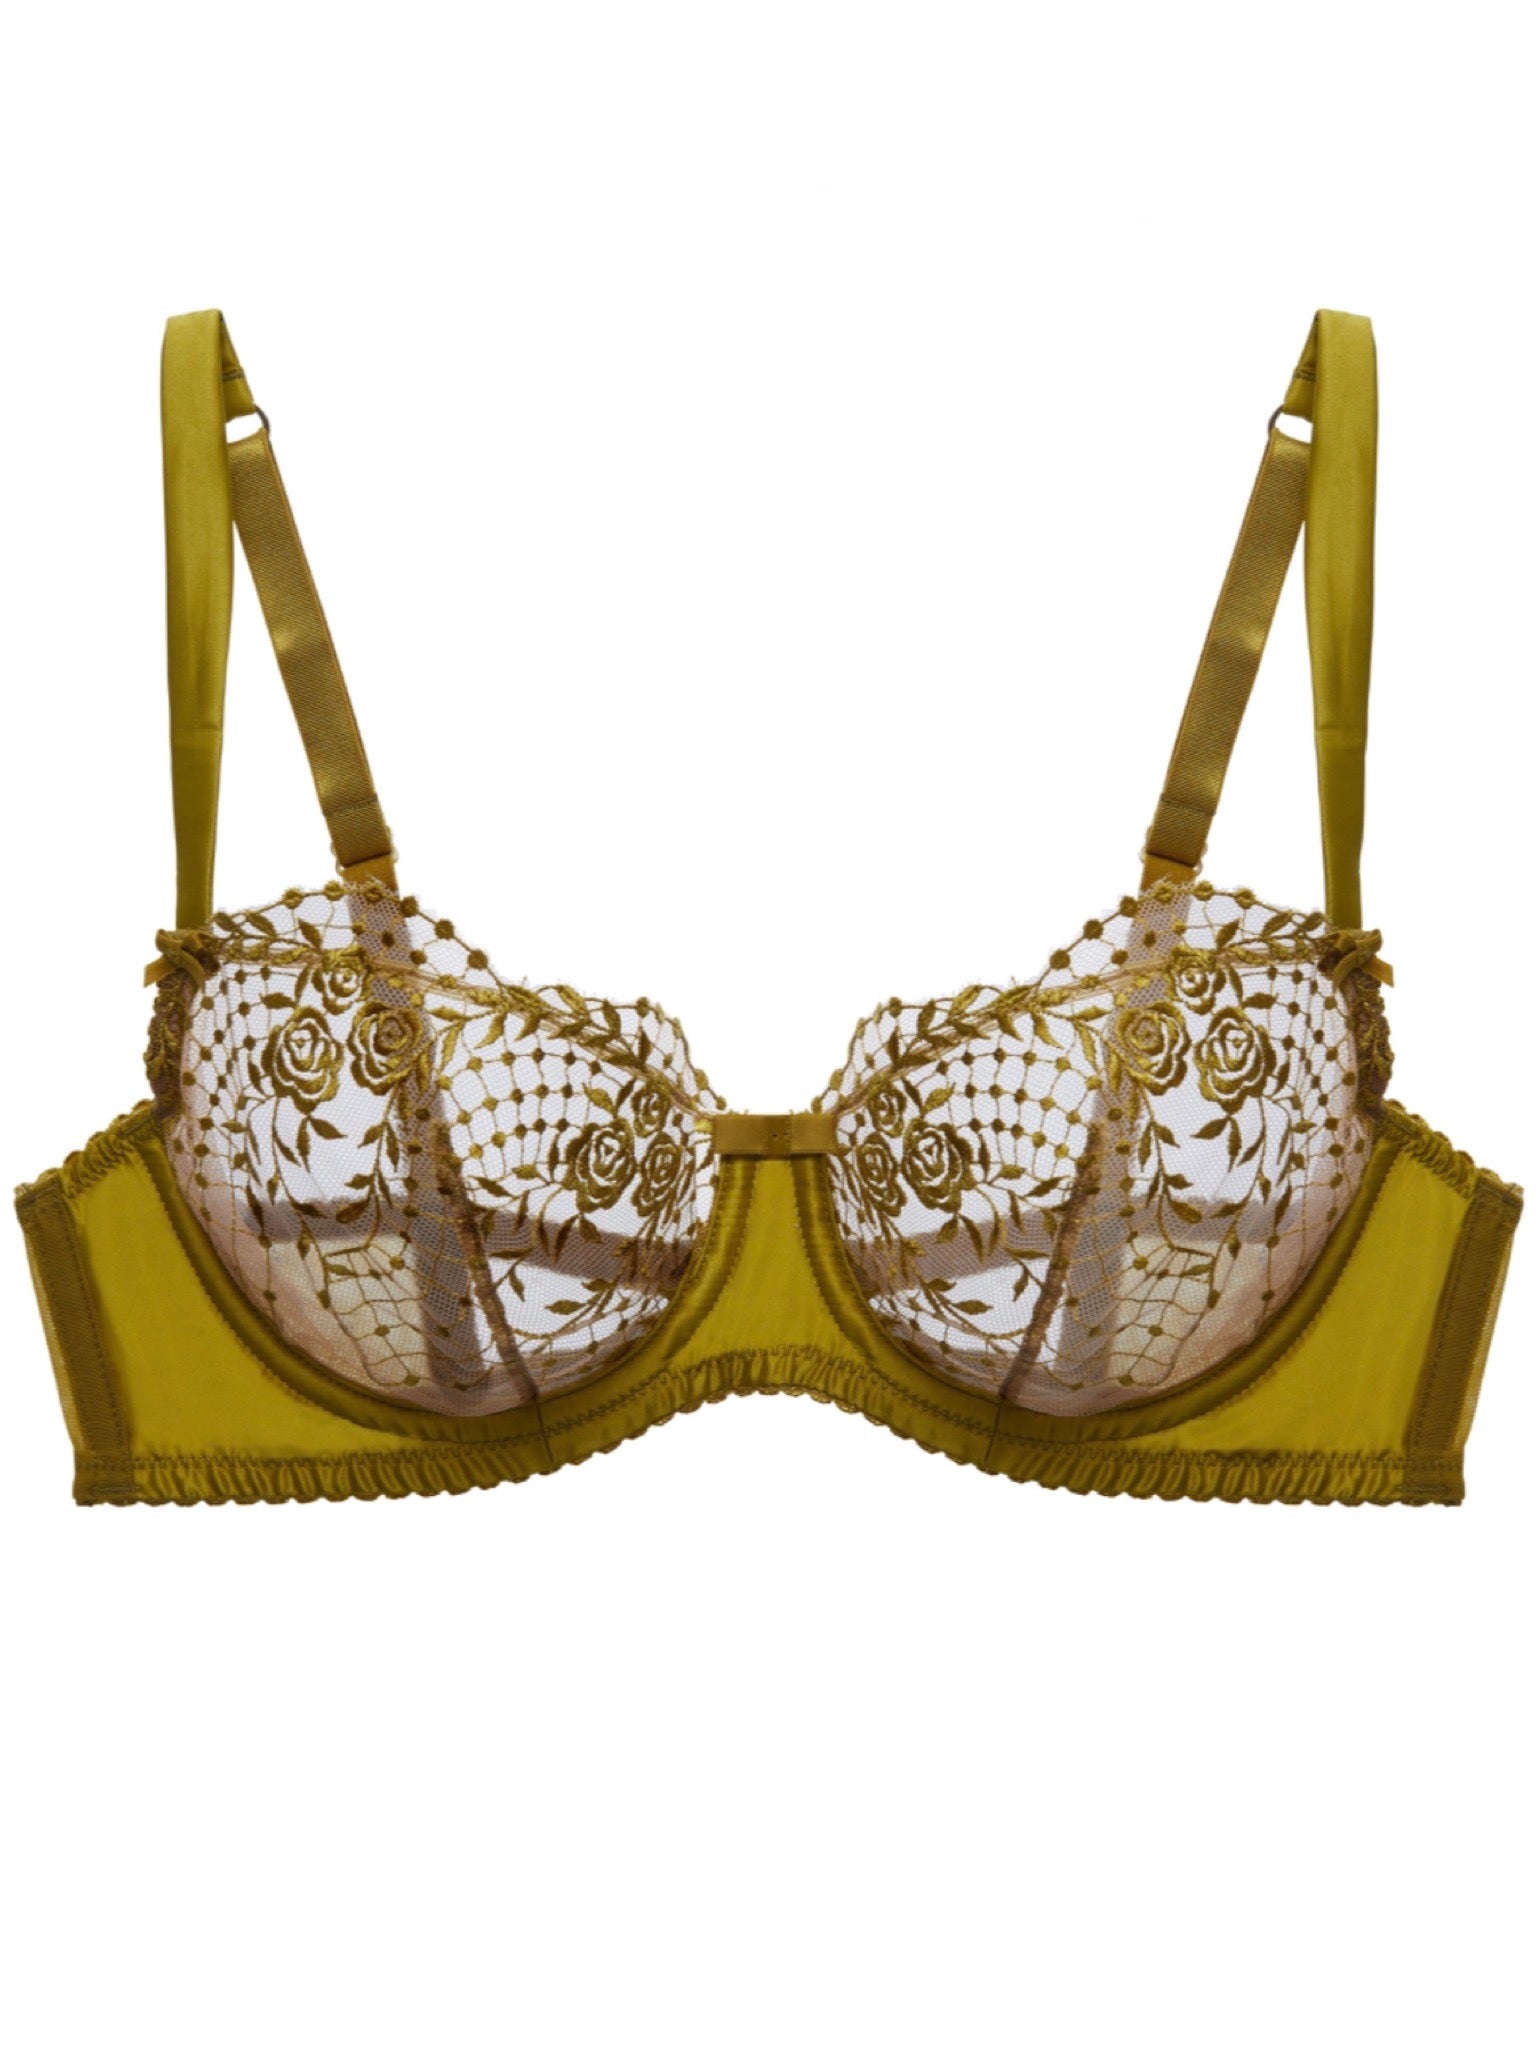 Julies Roses Chartreuse Underwire Bra - Last Chance to Buy!  34F